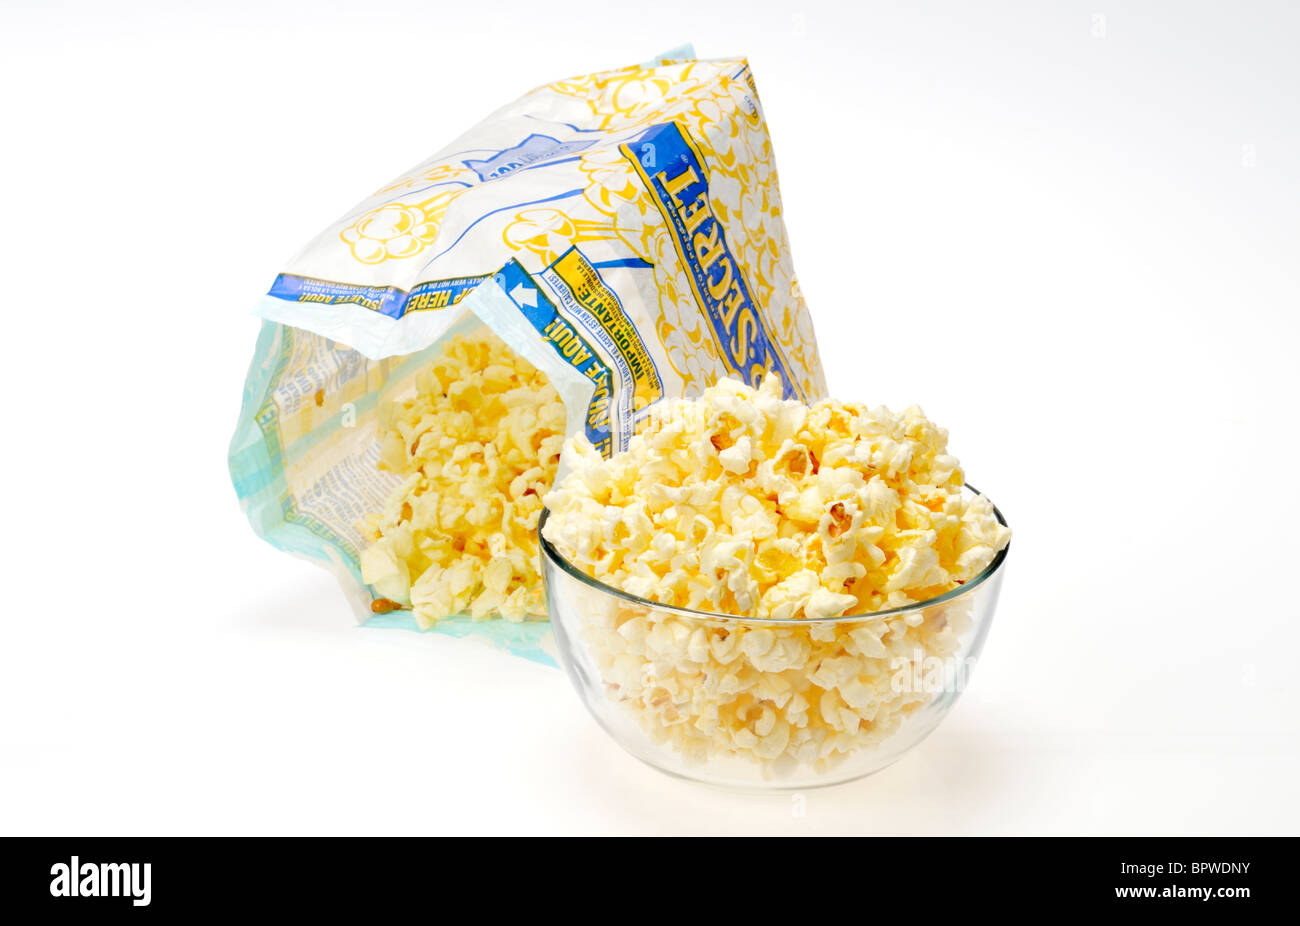 Open bag of Pop Secret microwave popcorn with some popcorn in glass bowl on white background, cutout. Stock Photo